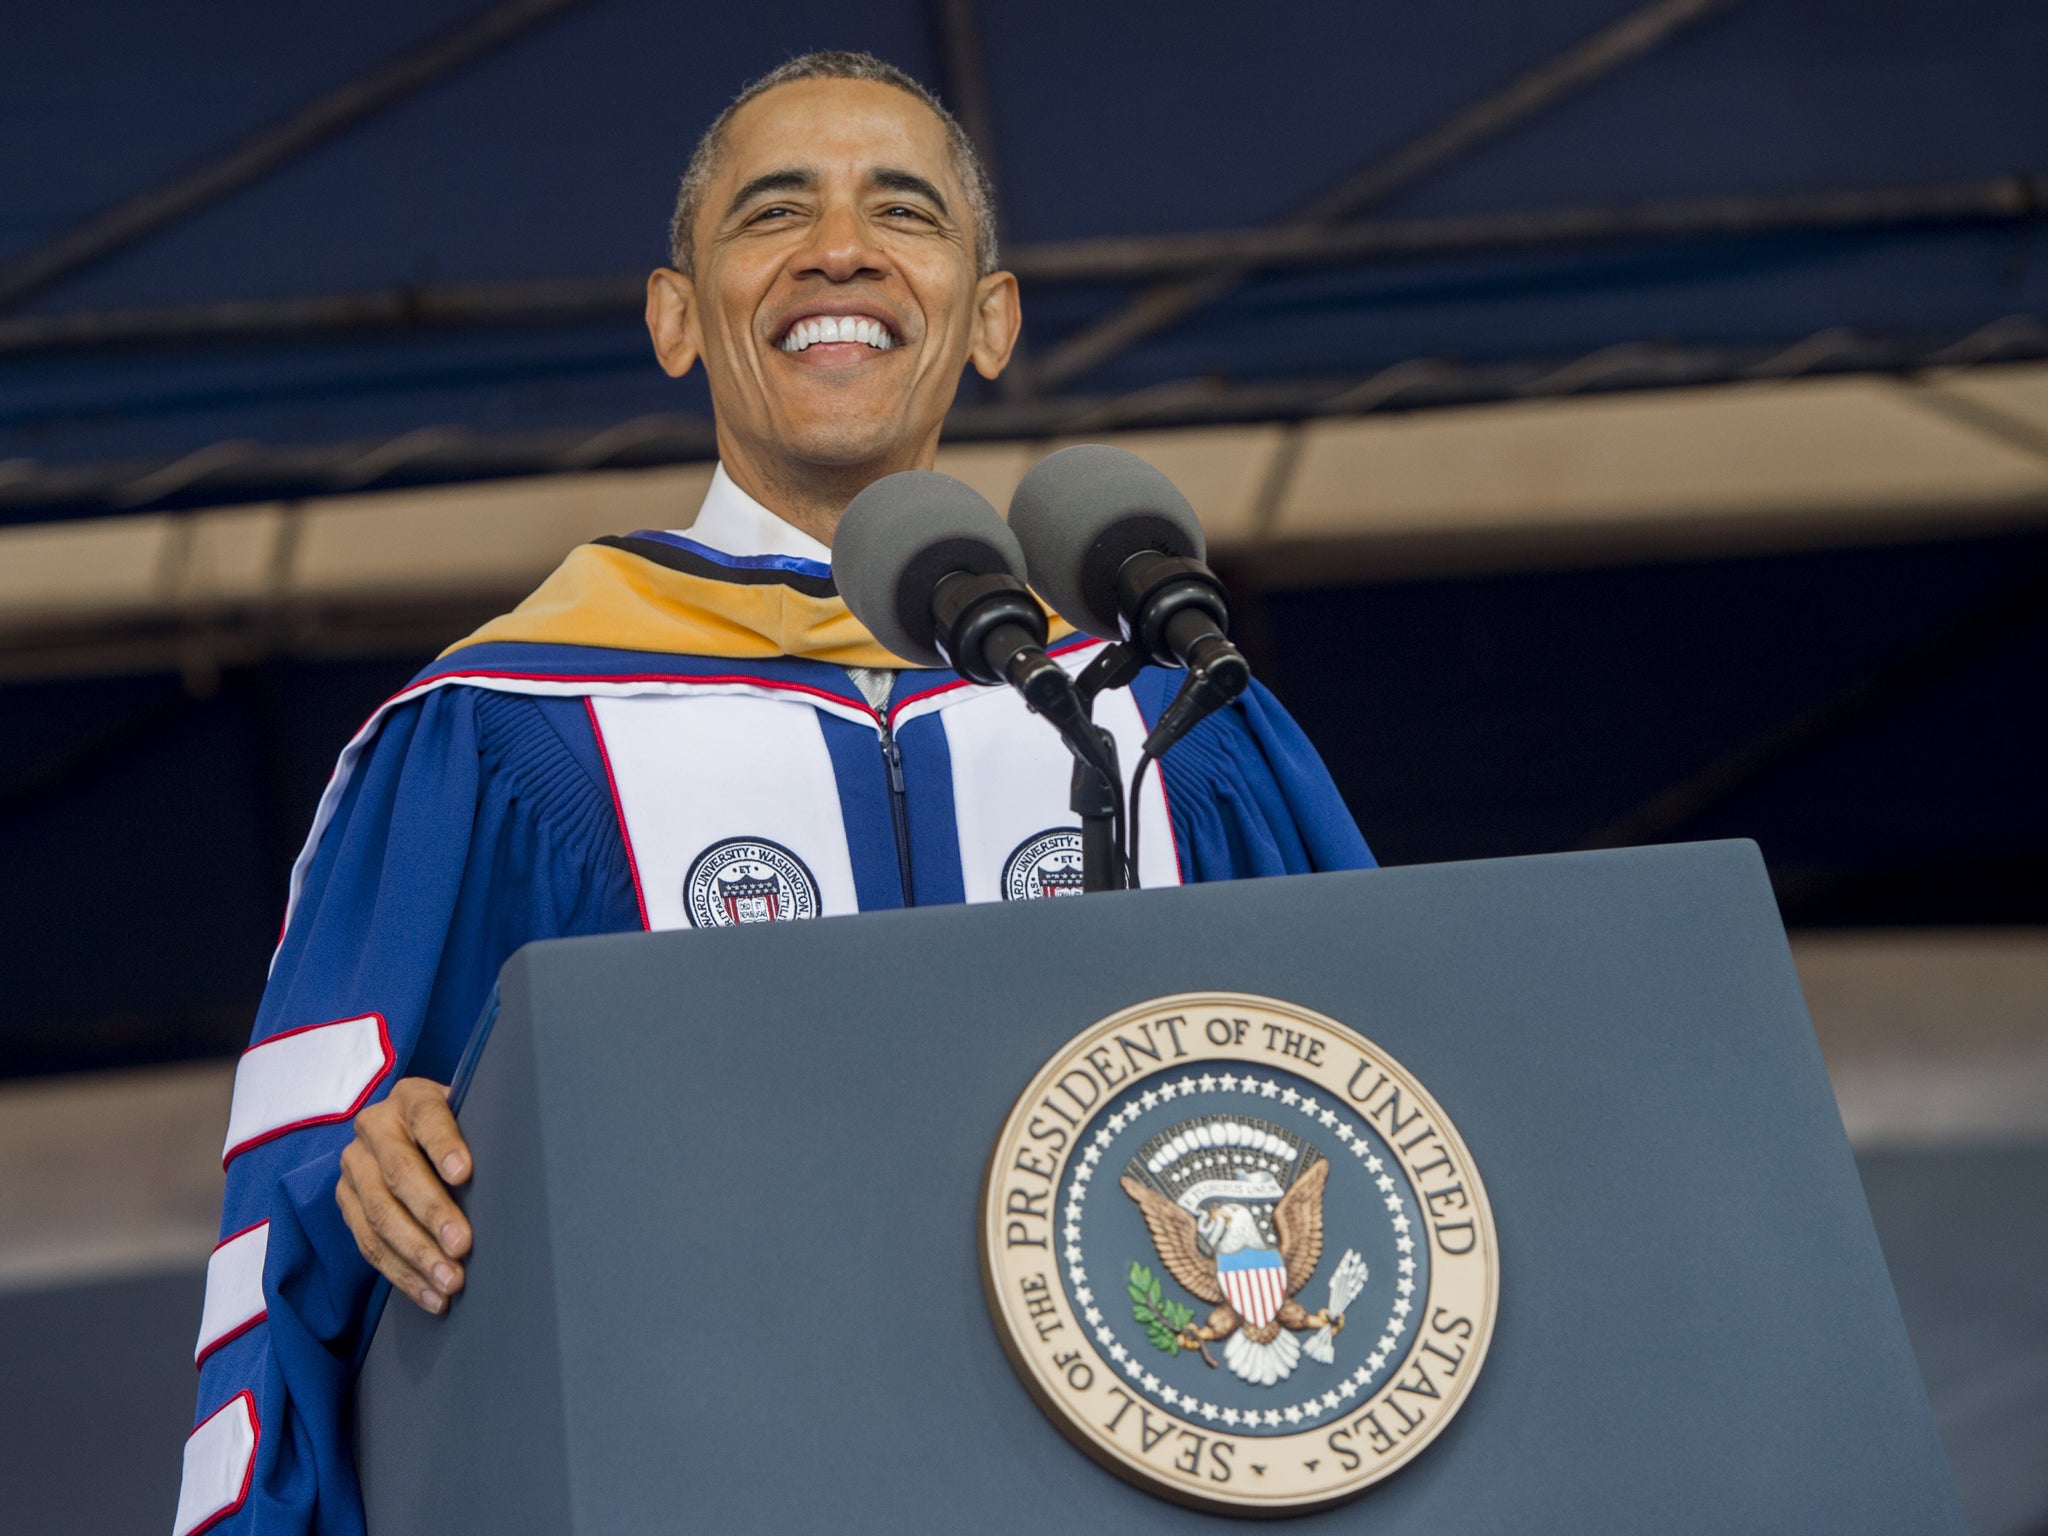 Mr Obama delivered the first of his three last commencement speeches as president Saul Loeb/Getty